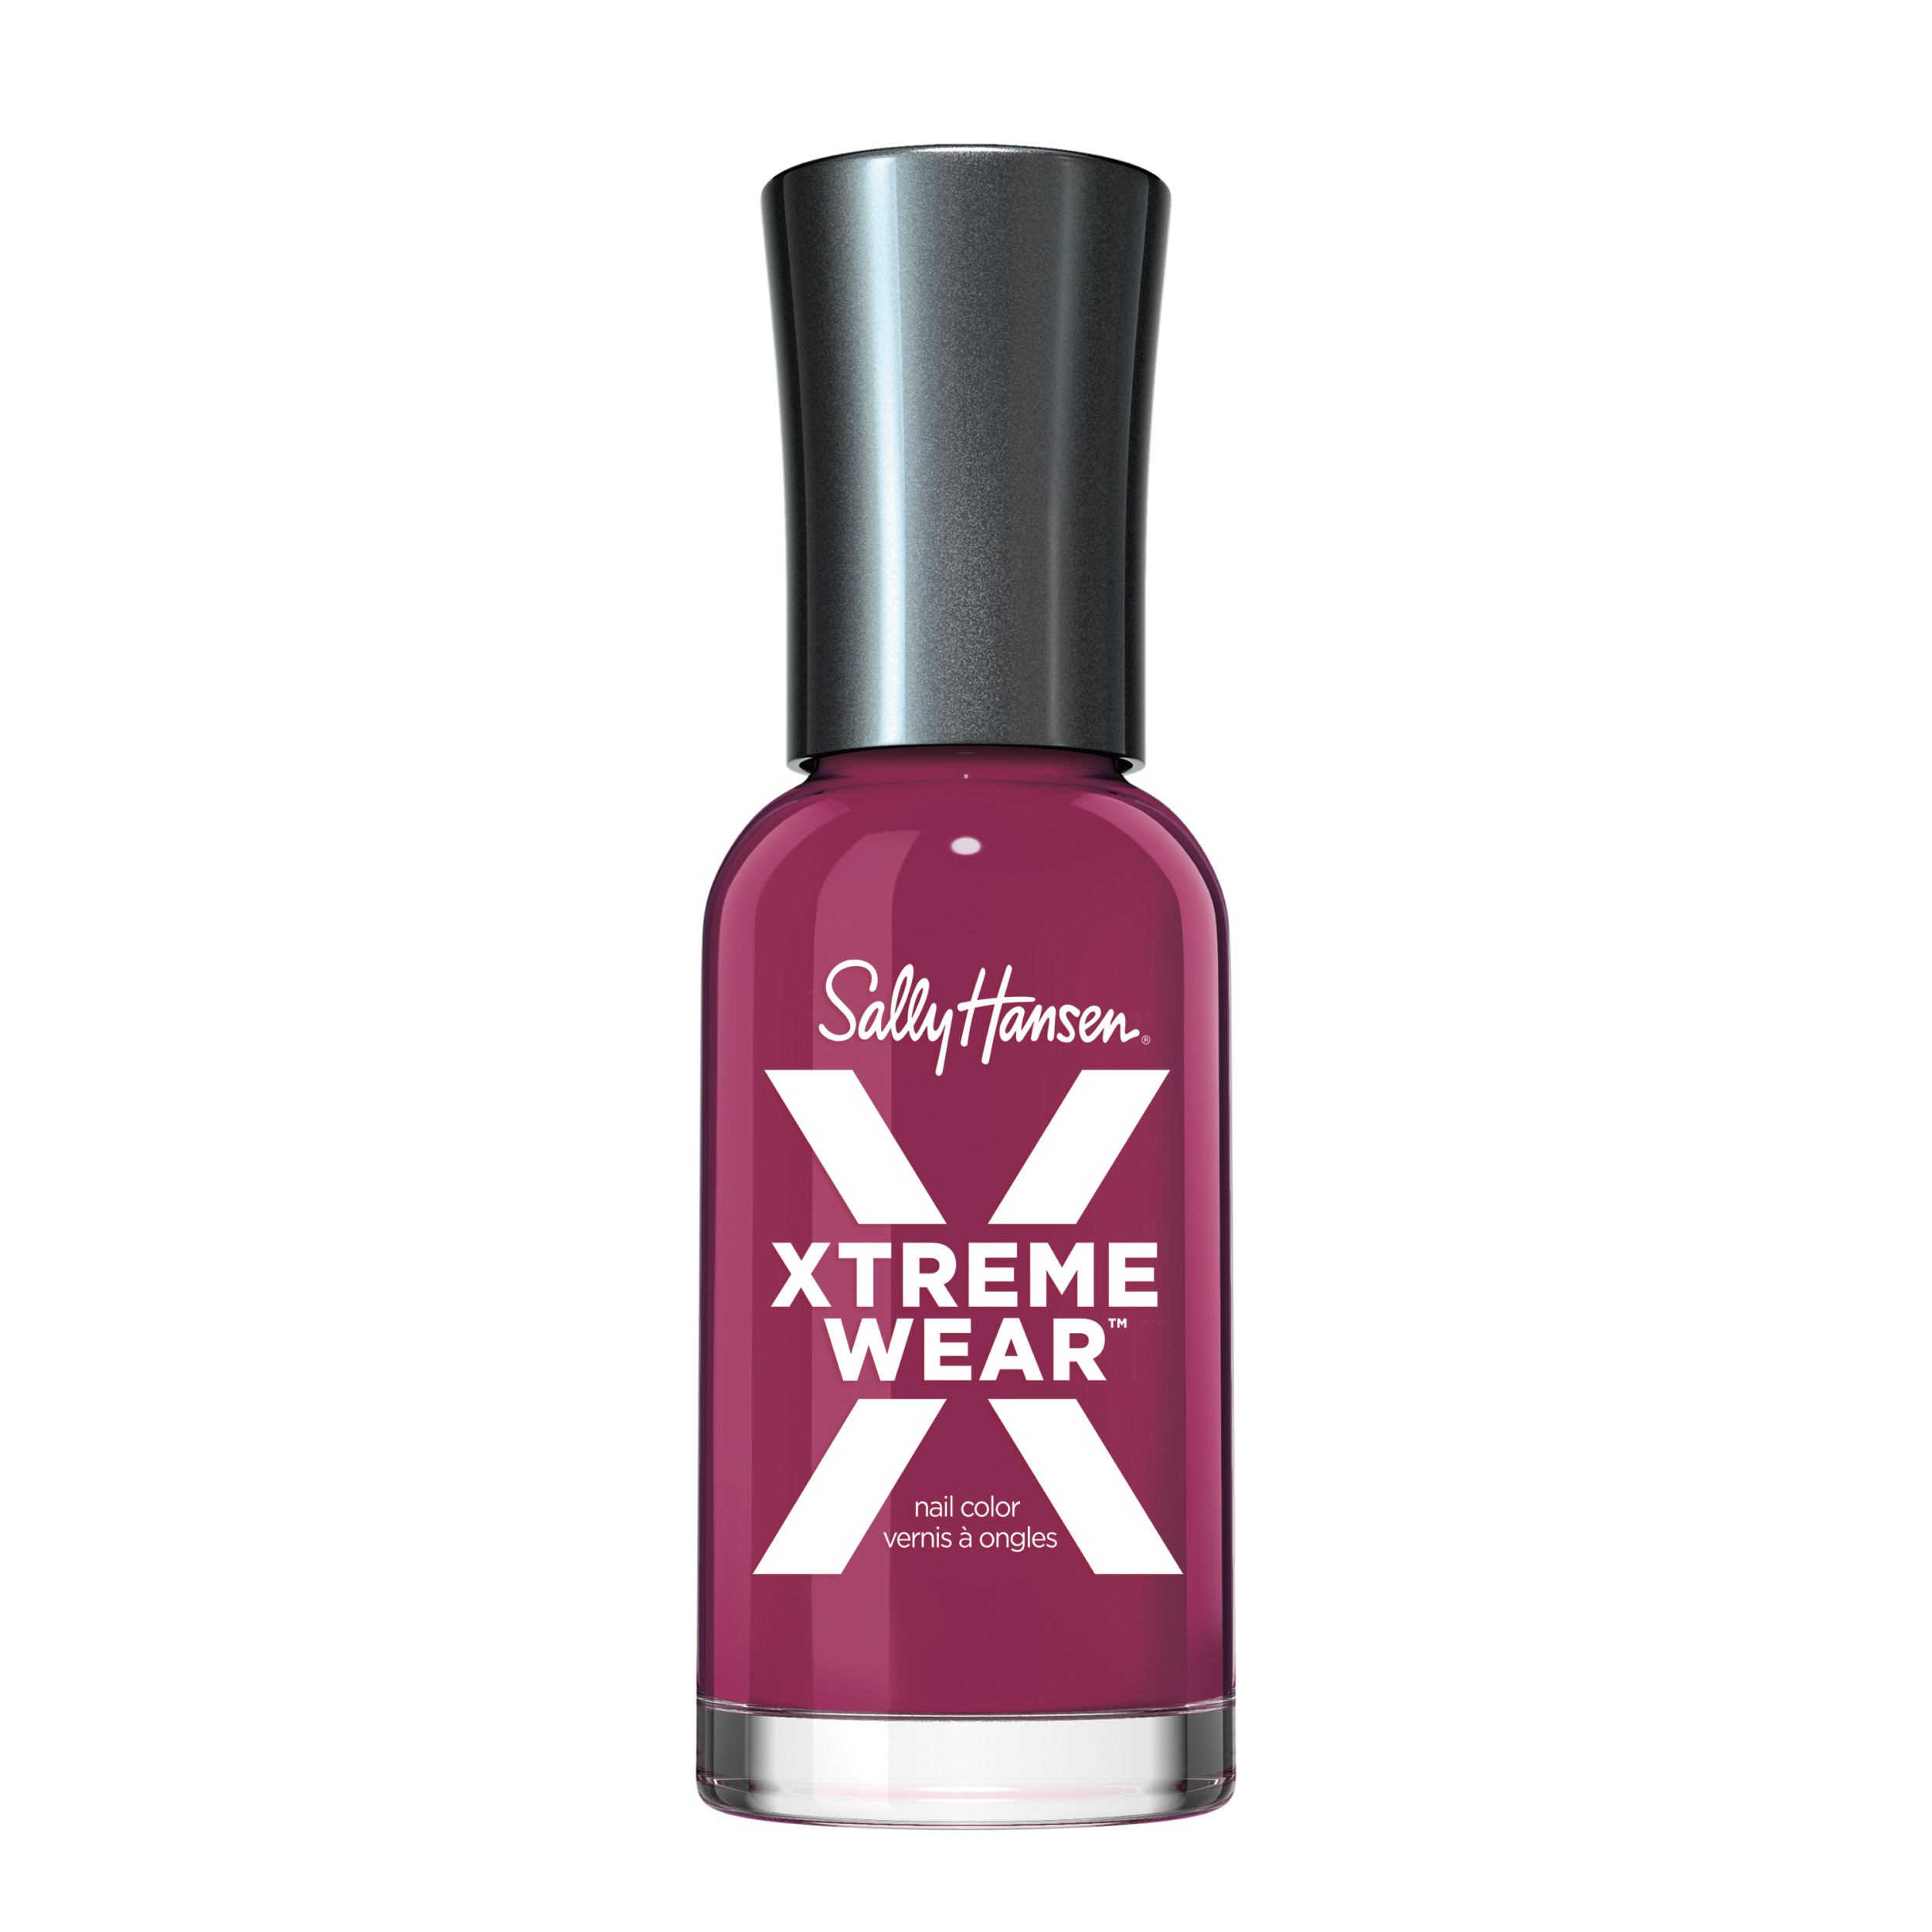 Sally Hansen Xtreme Wear Nail Polish, Drop The Beet, 0.4 fl oz, Chip Resistant, Bold Color - image 1 of 14